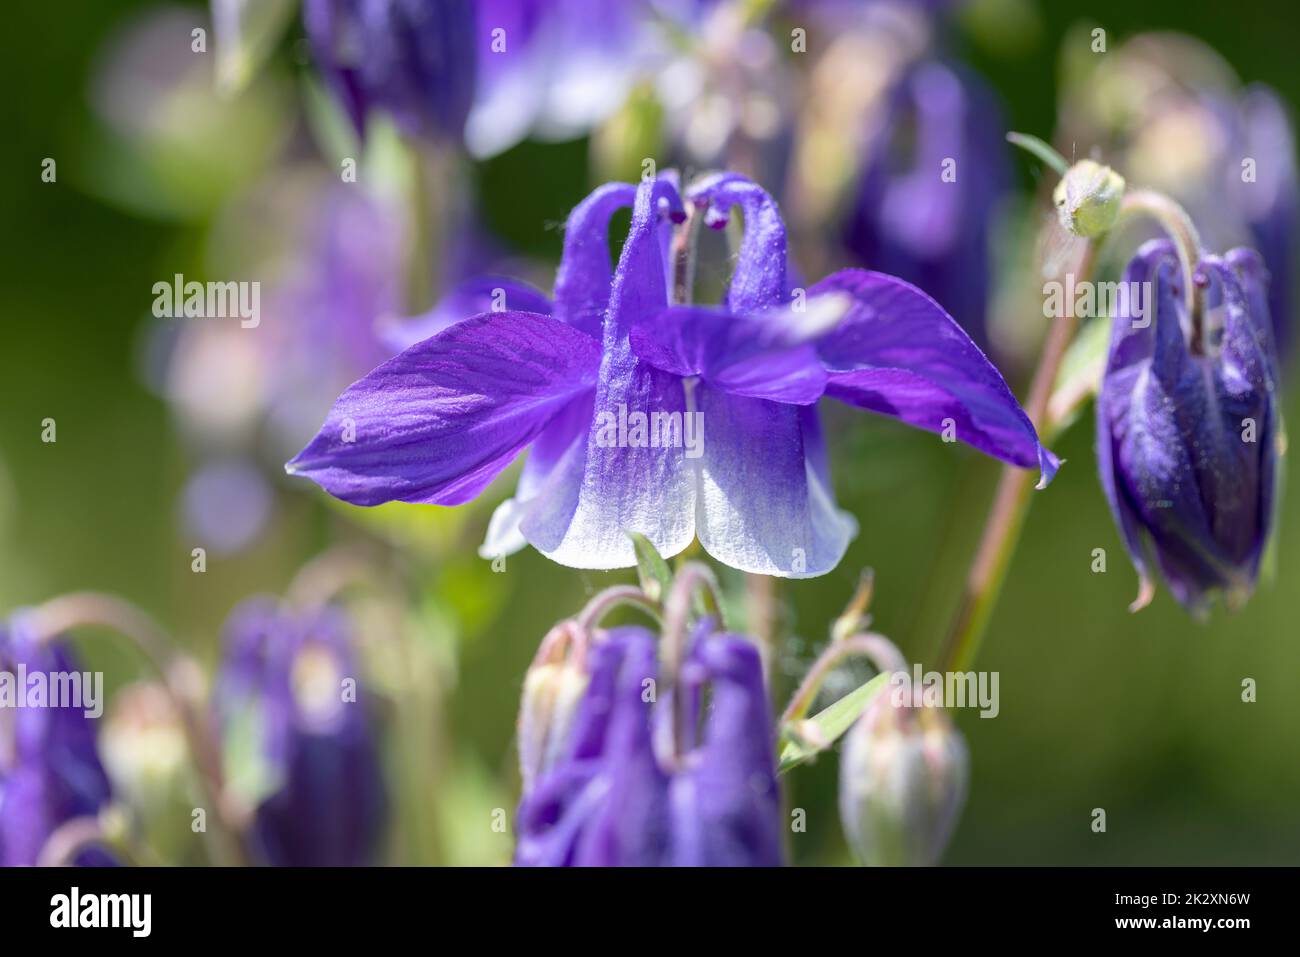 Beautiful flower of pink color Aquilegia vulgaris blooming in the garden, close up Stock Photo